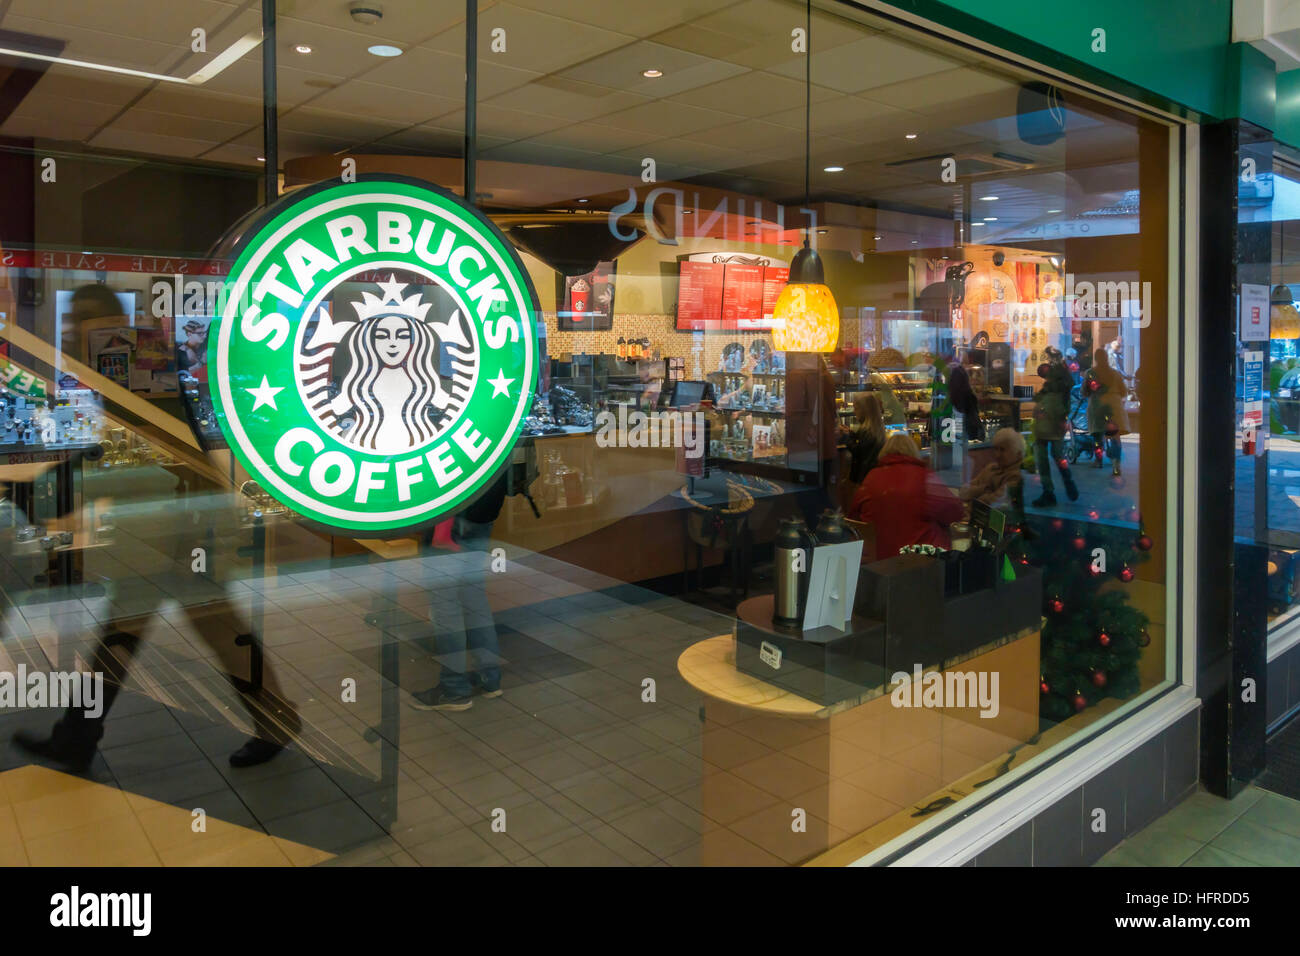 Starbucks Coffee Shop in a shopping arcade with people hurrying by reflected in the window Stock Photo